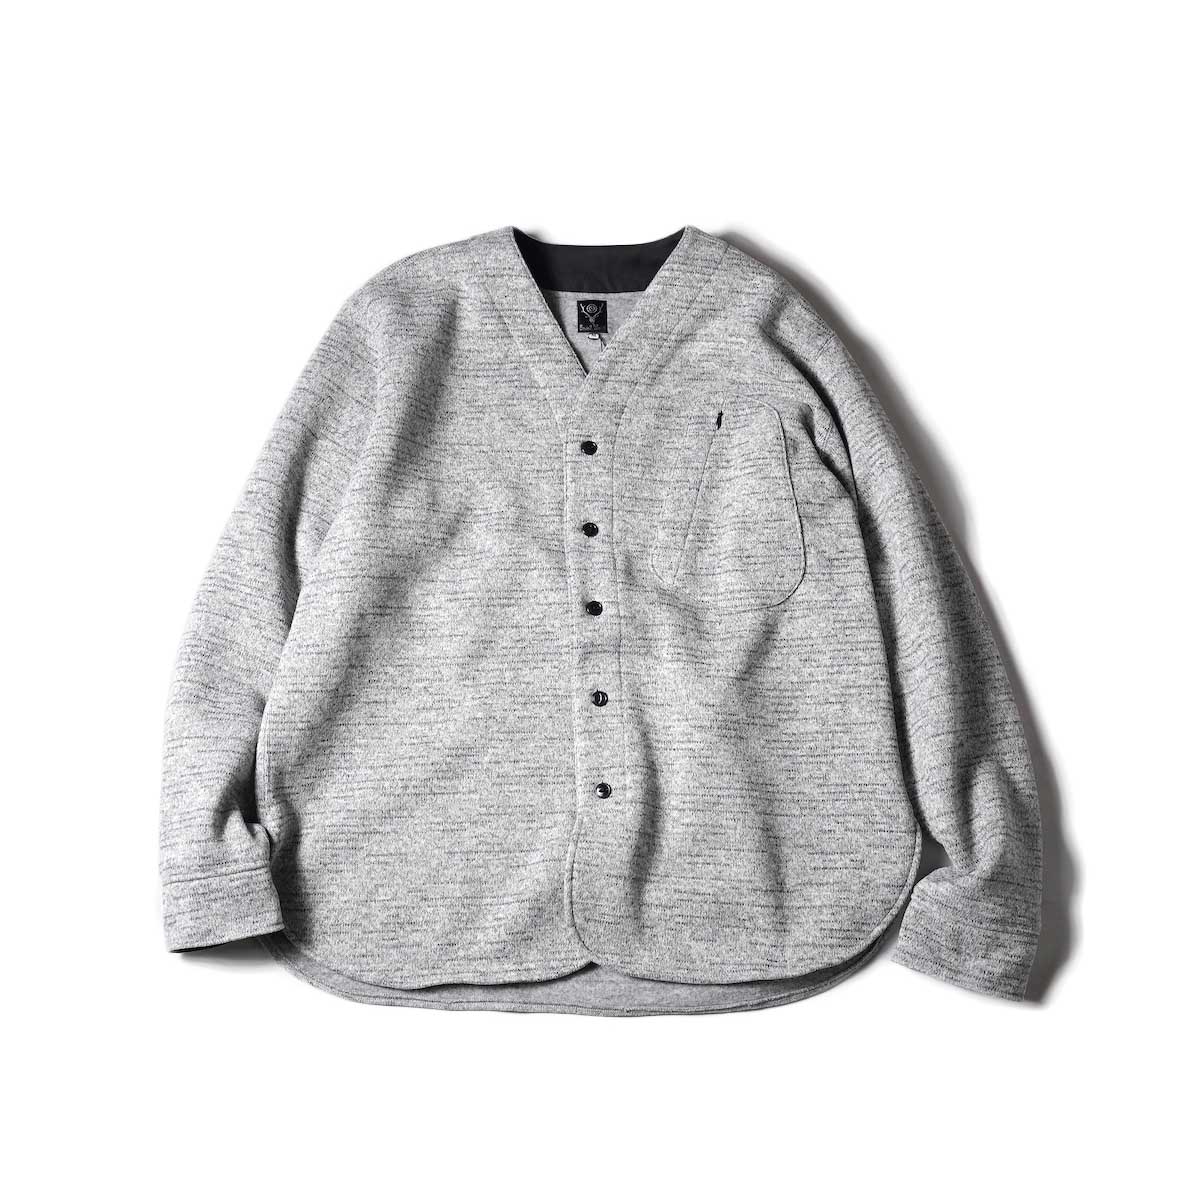 South2 West8 / Scouting Shirt - POLARTEC Fleece Lined Jersey (Grey)